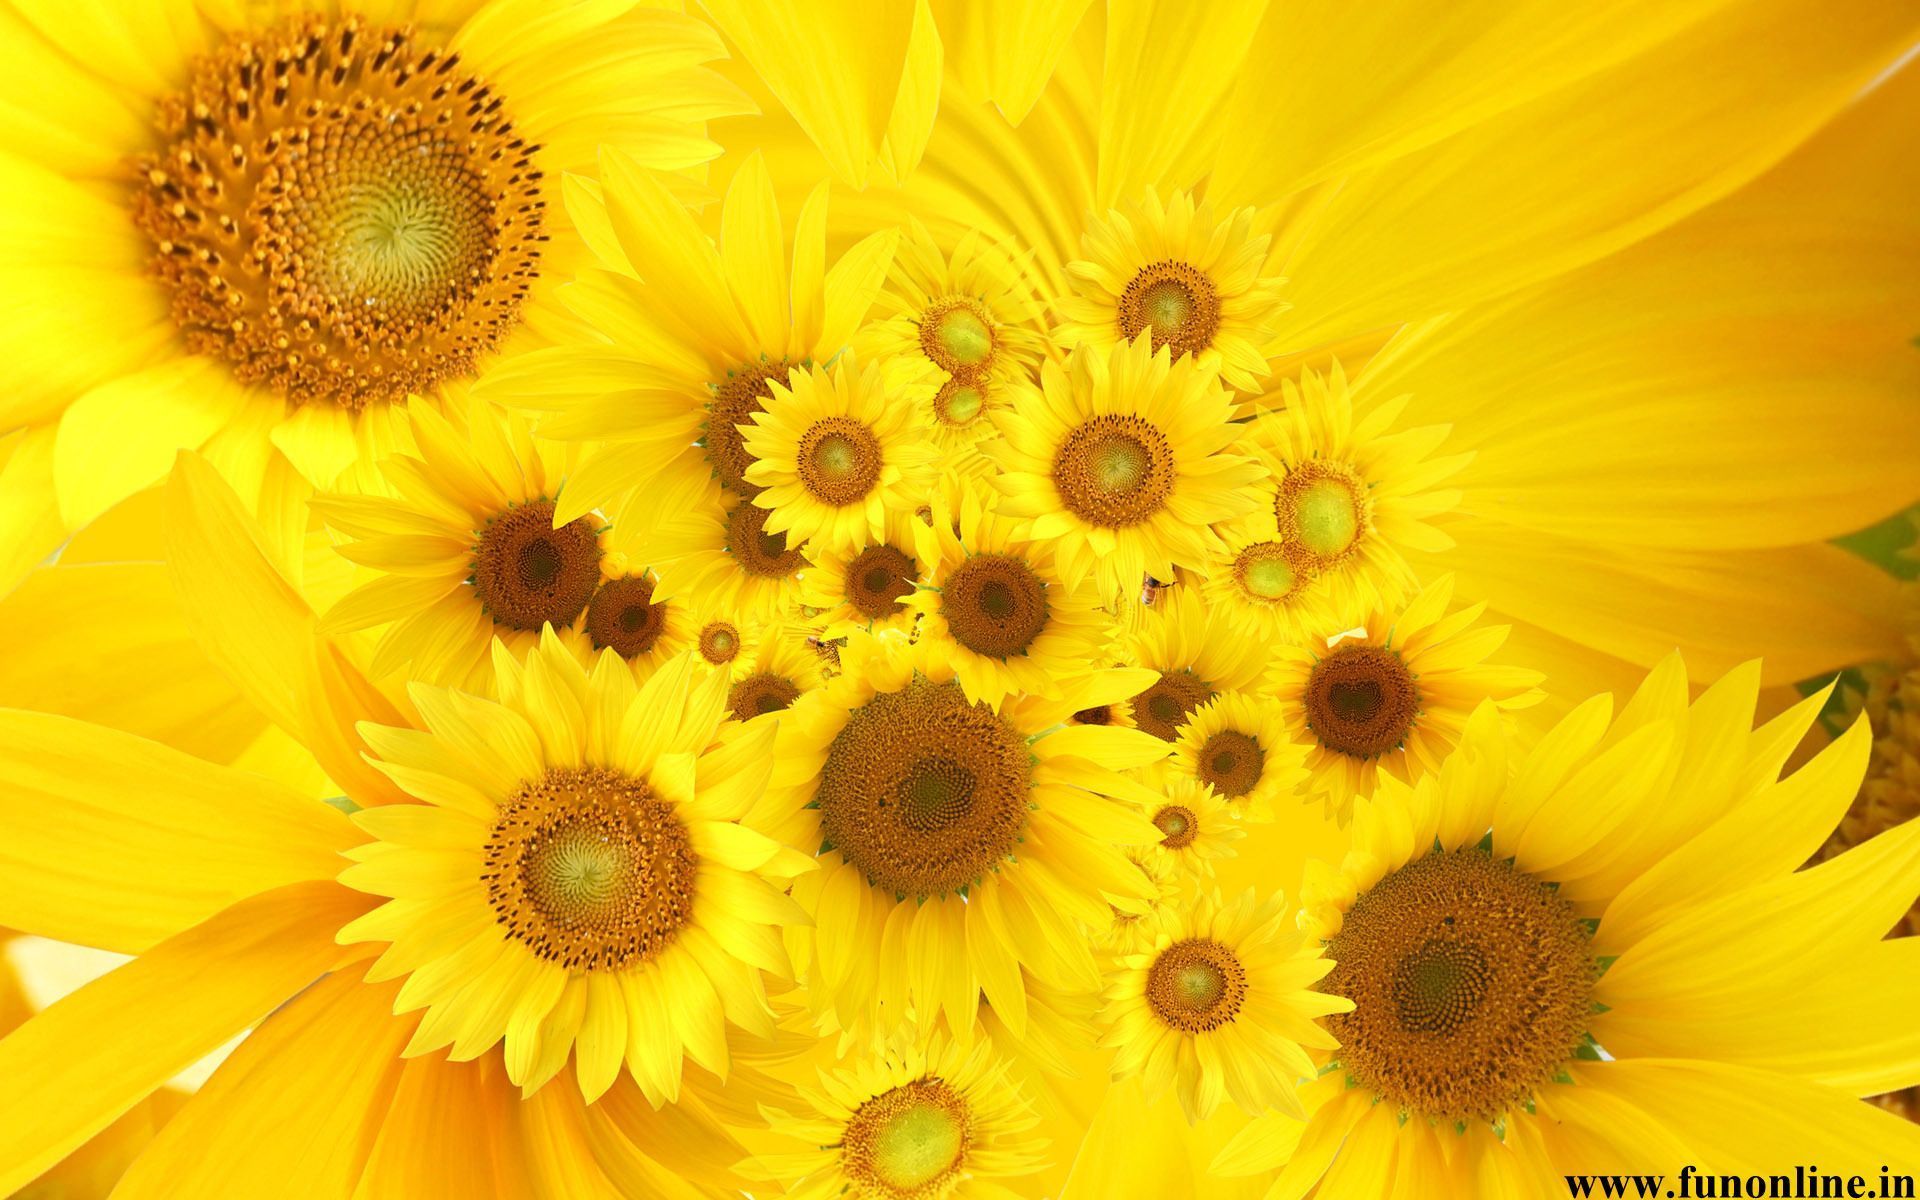 Sunflower Wallpapers, Beautiful Sunflowers HD Wallpapers For Free